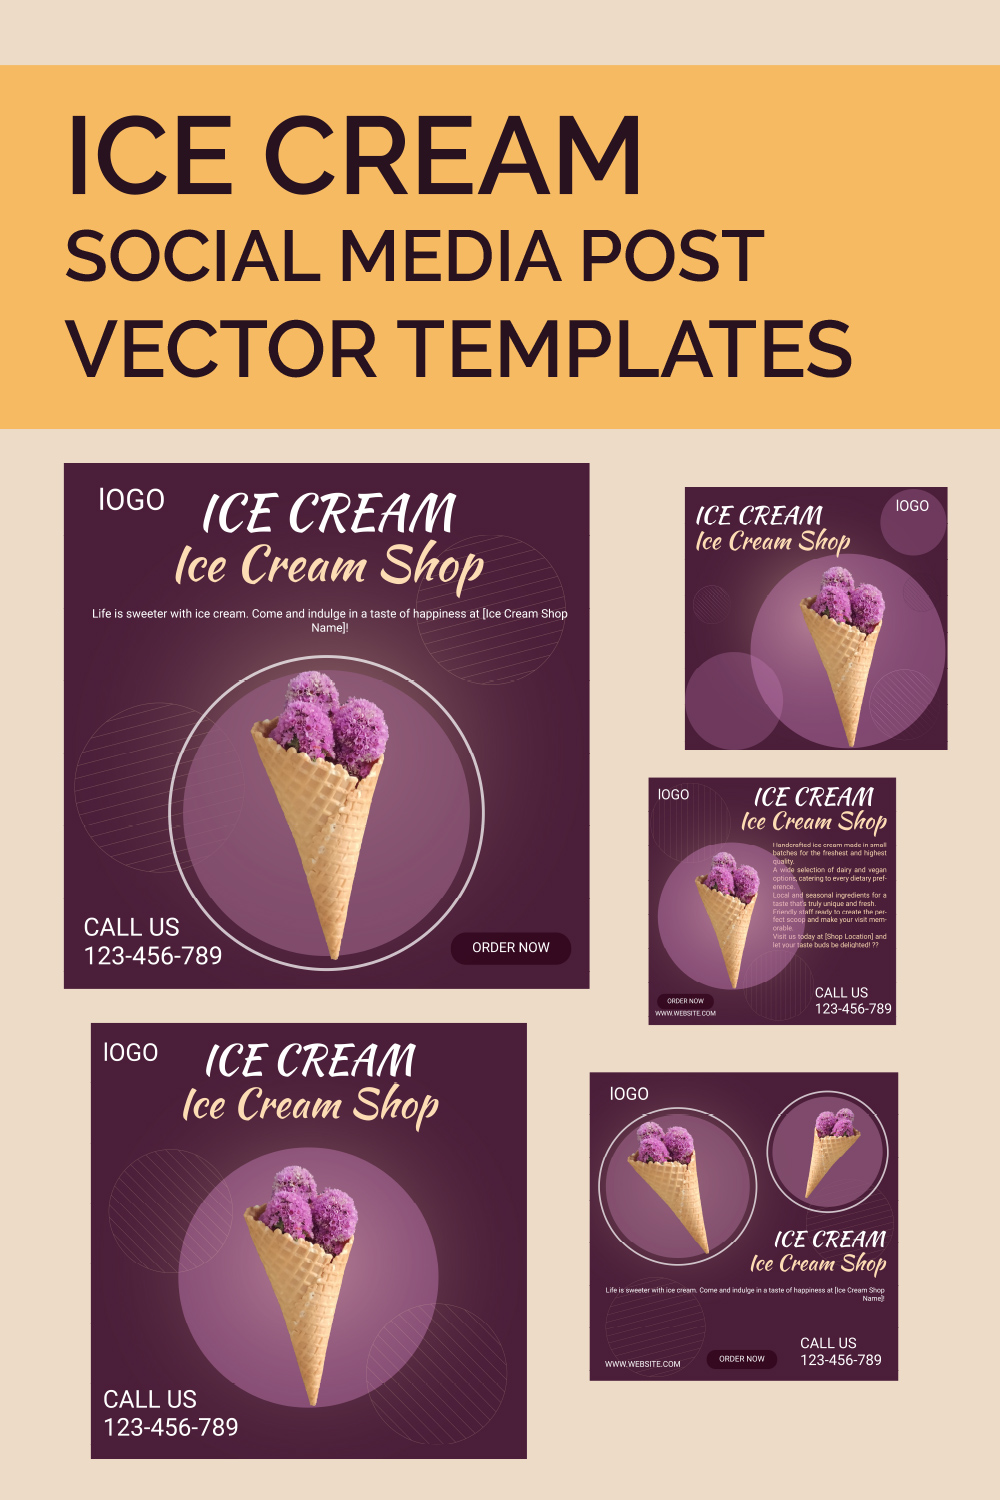 Ice cream social media post vector templates pinterest preview image.